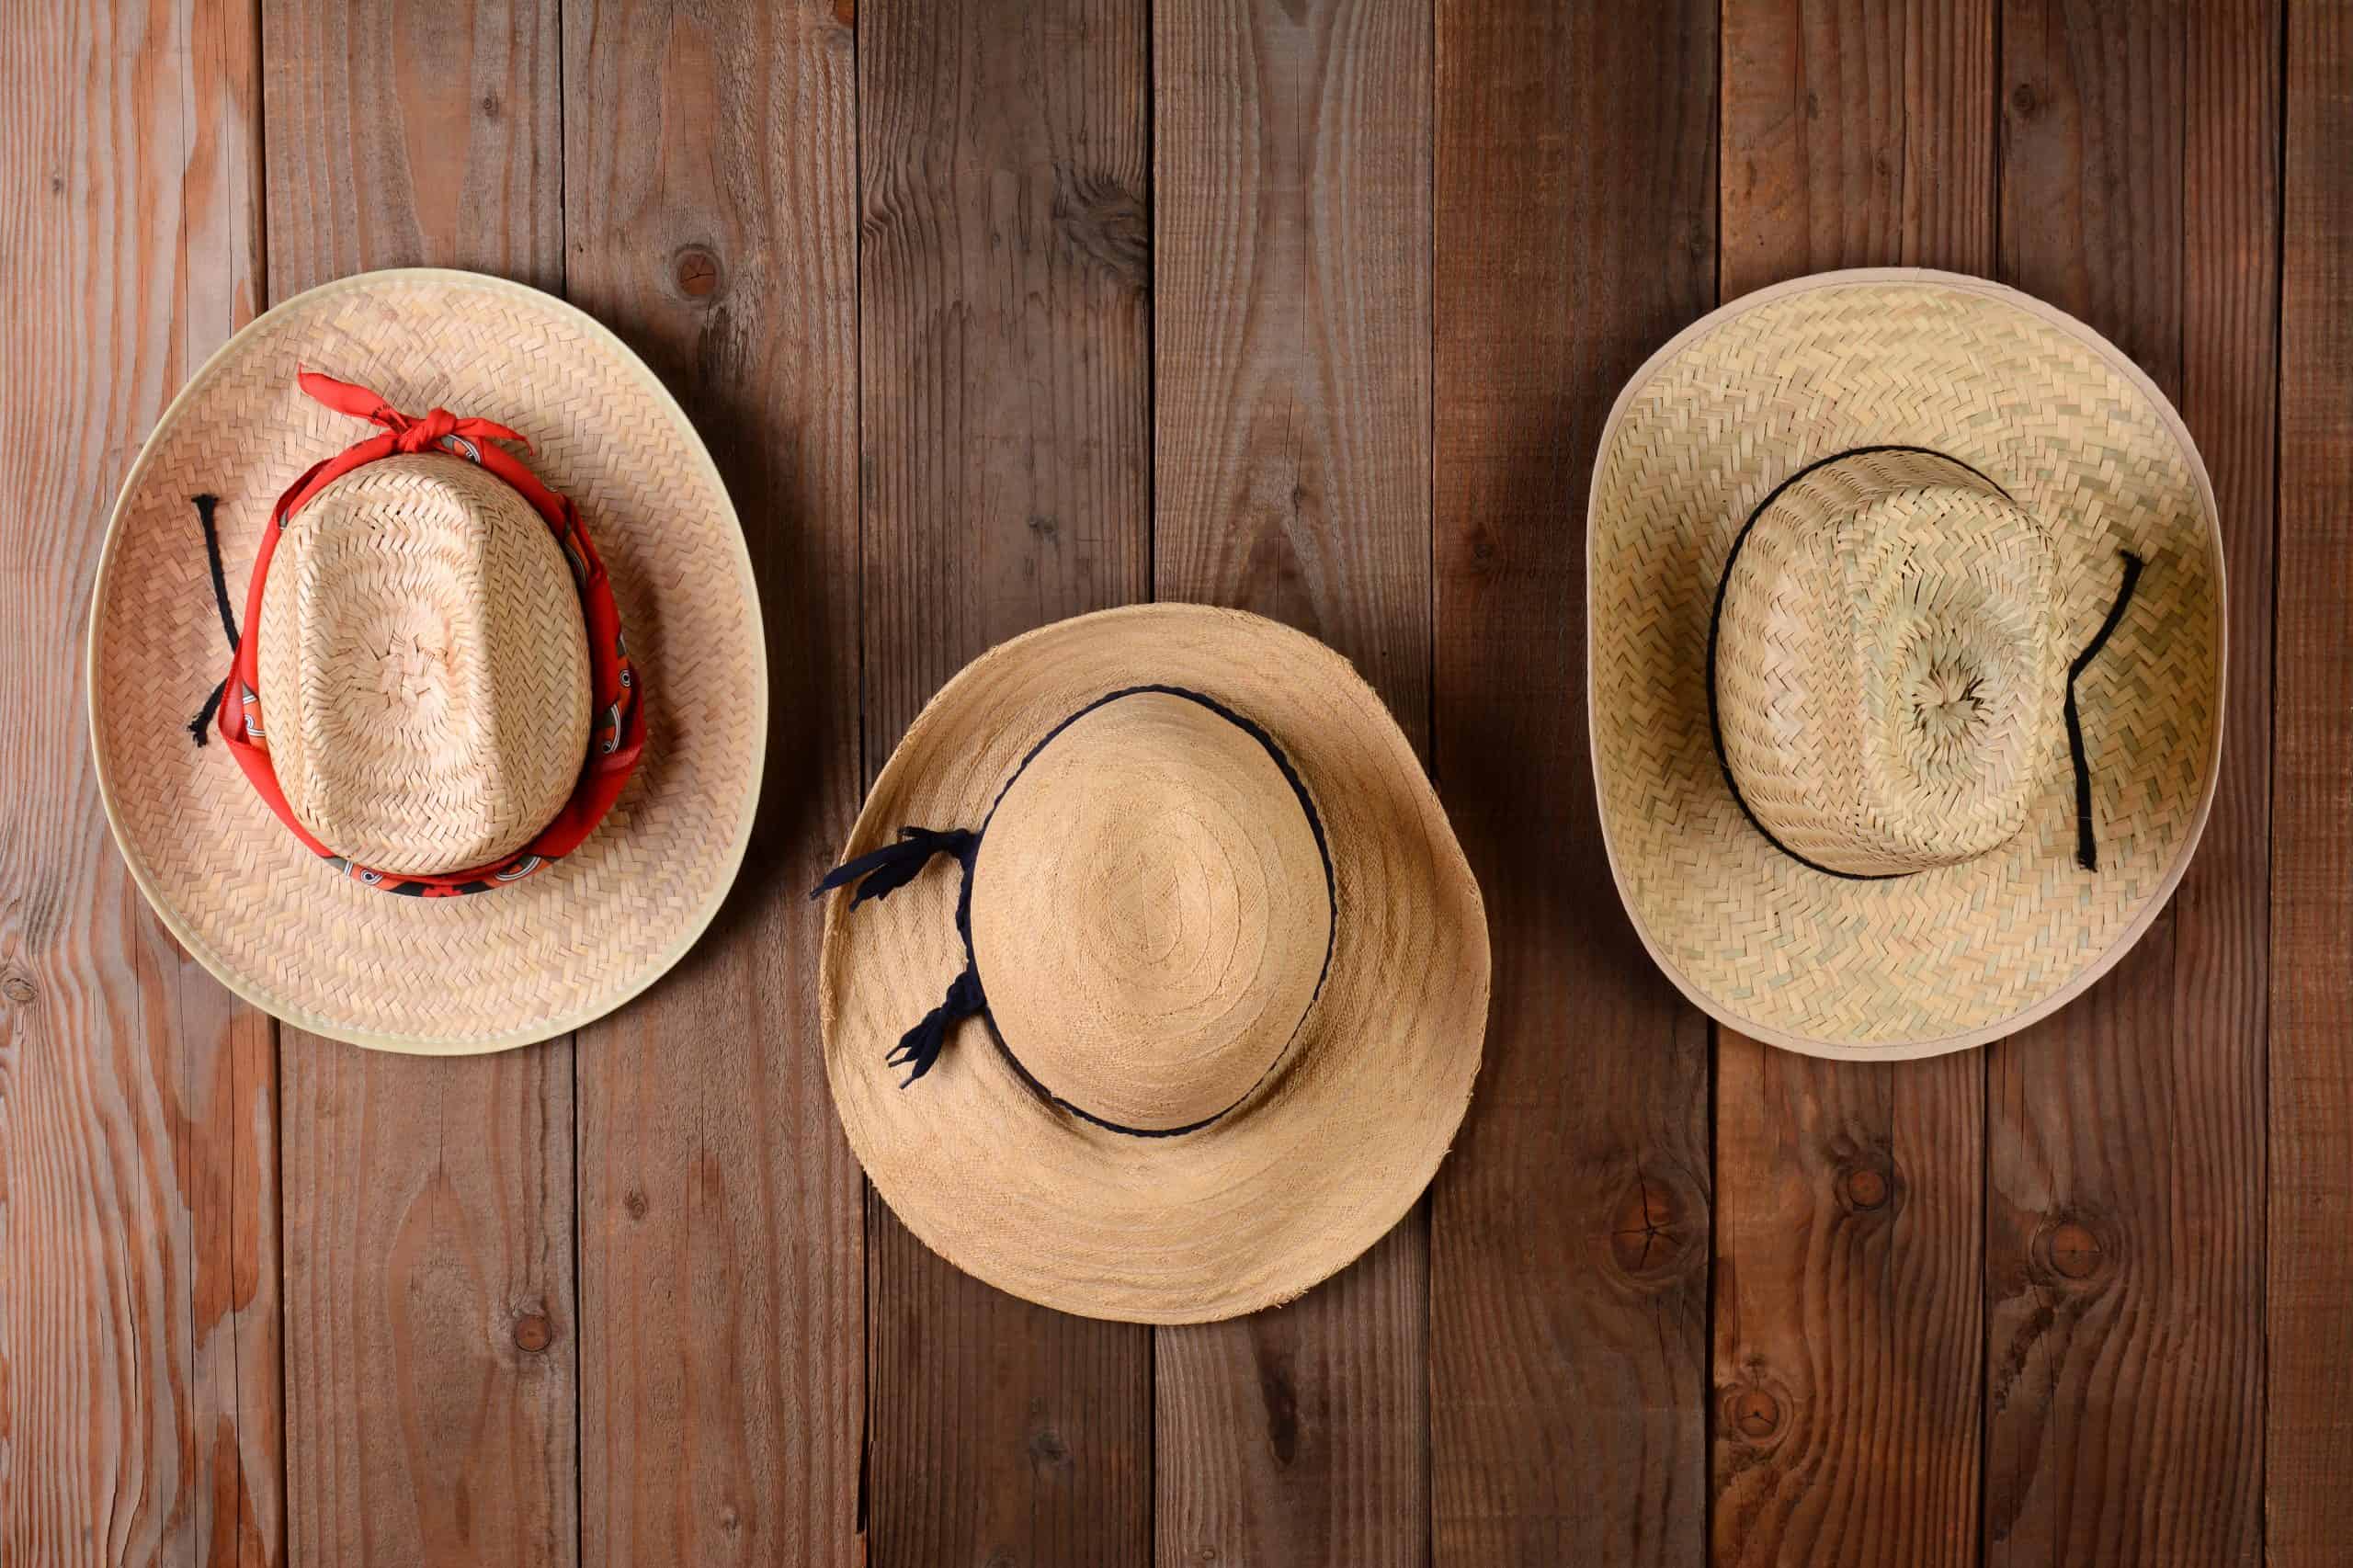 Three straw hats hanging on a rustic wood farmhouse wall. Closeup in horizontal format.